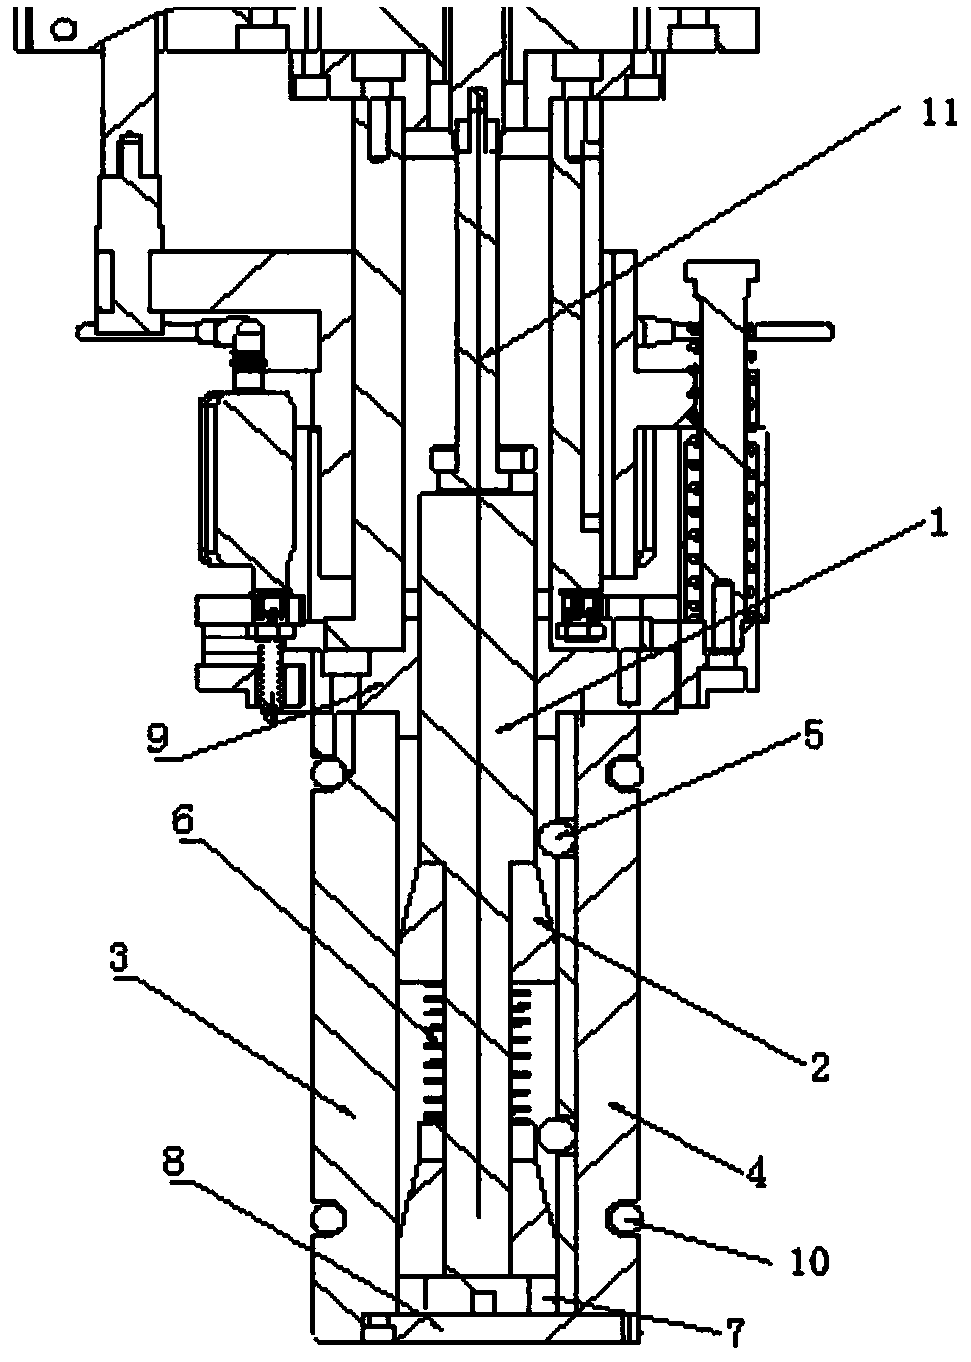 A High-Precision Self-Centering Clamping Mechanism Applied to Clamping of Thin-wall Kits